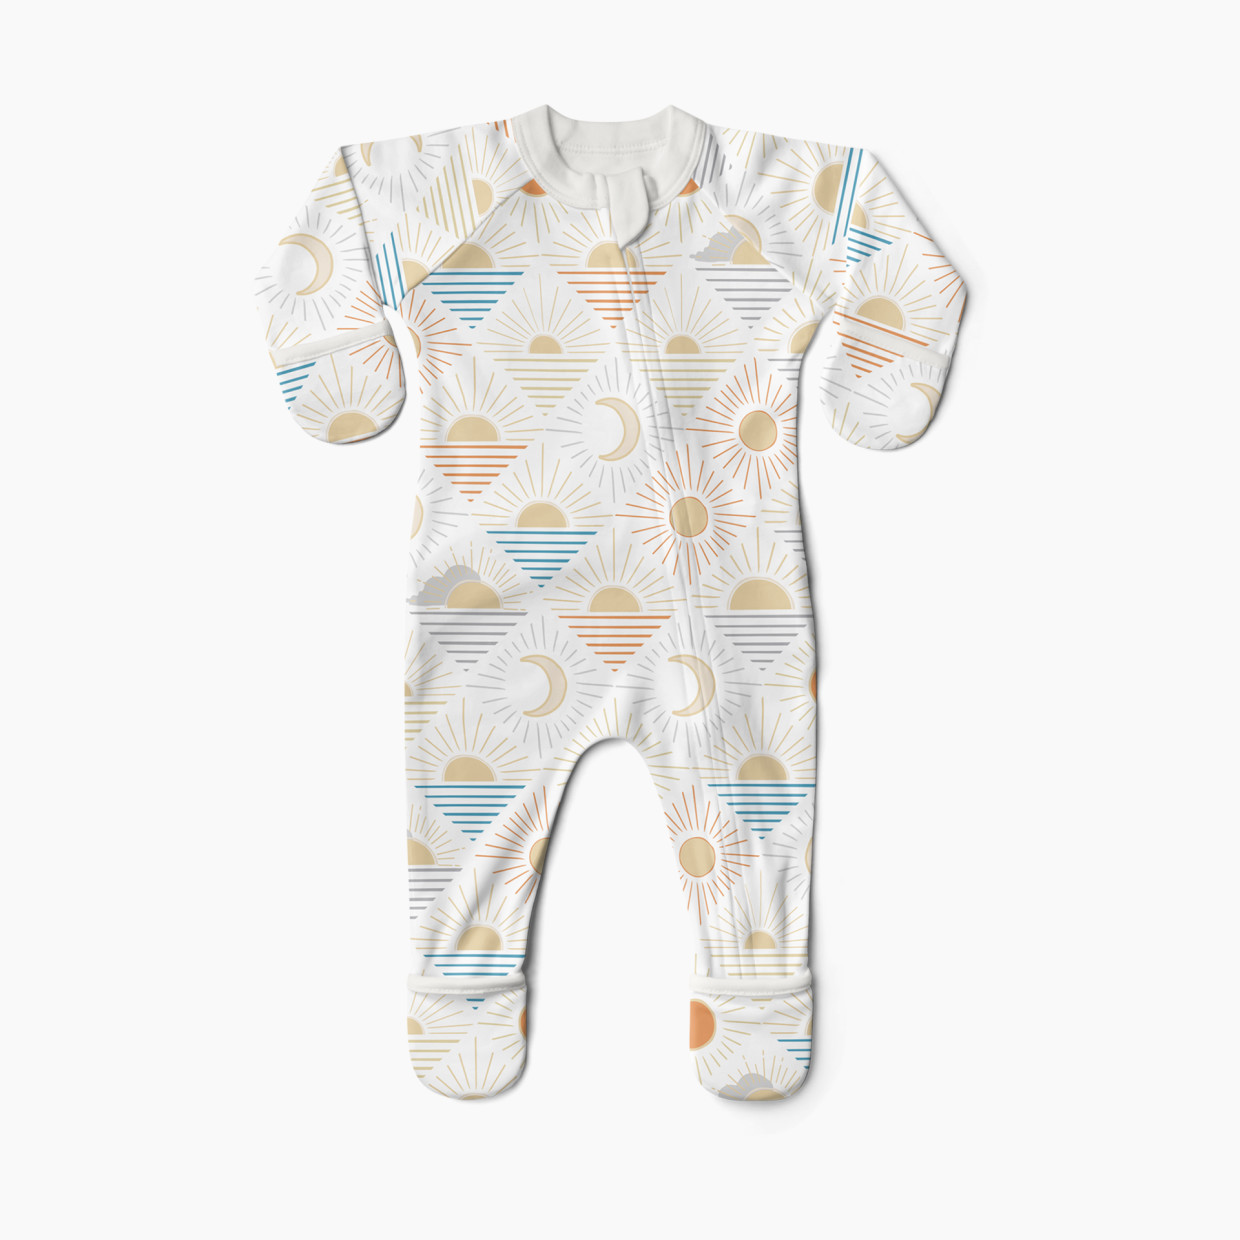 Goumi Kids x Babylist Grow With You Footie - Loose Fit - Celestial, 0-3 M.